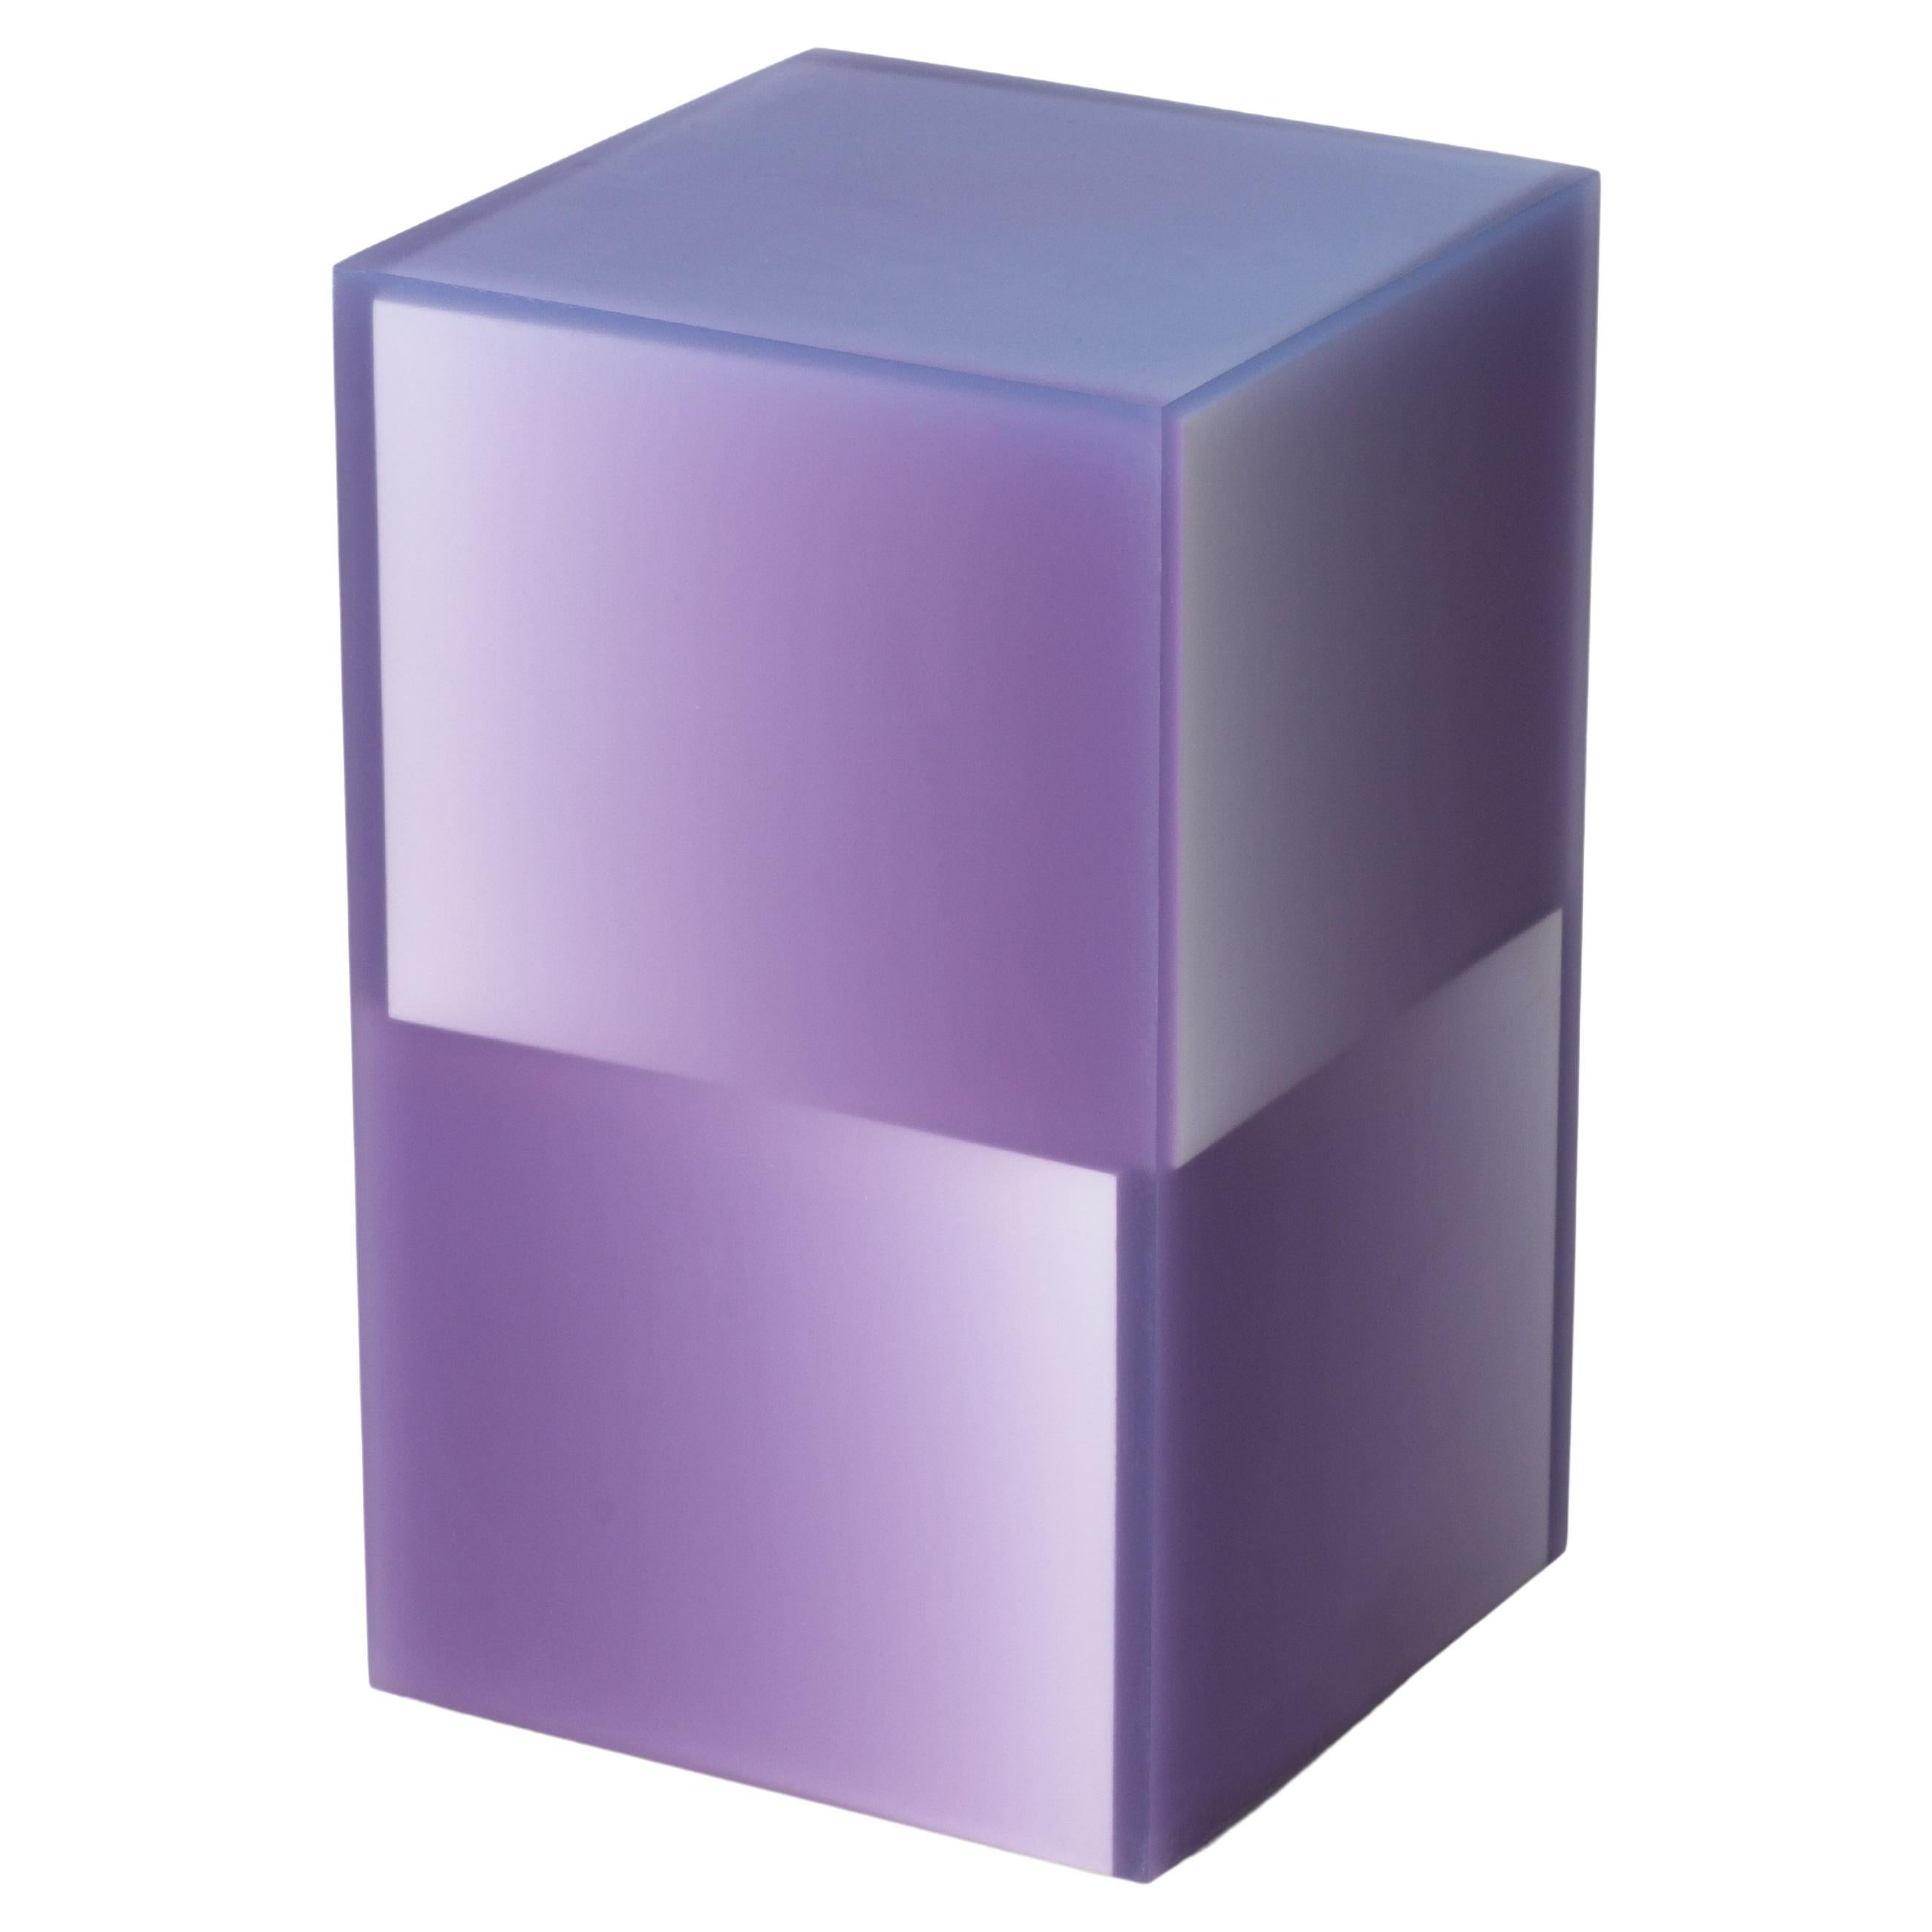 Two Way Shift Box Resin Side Table/Stool Purple by Facture REP Tuleste Factory